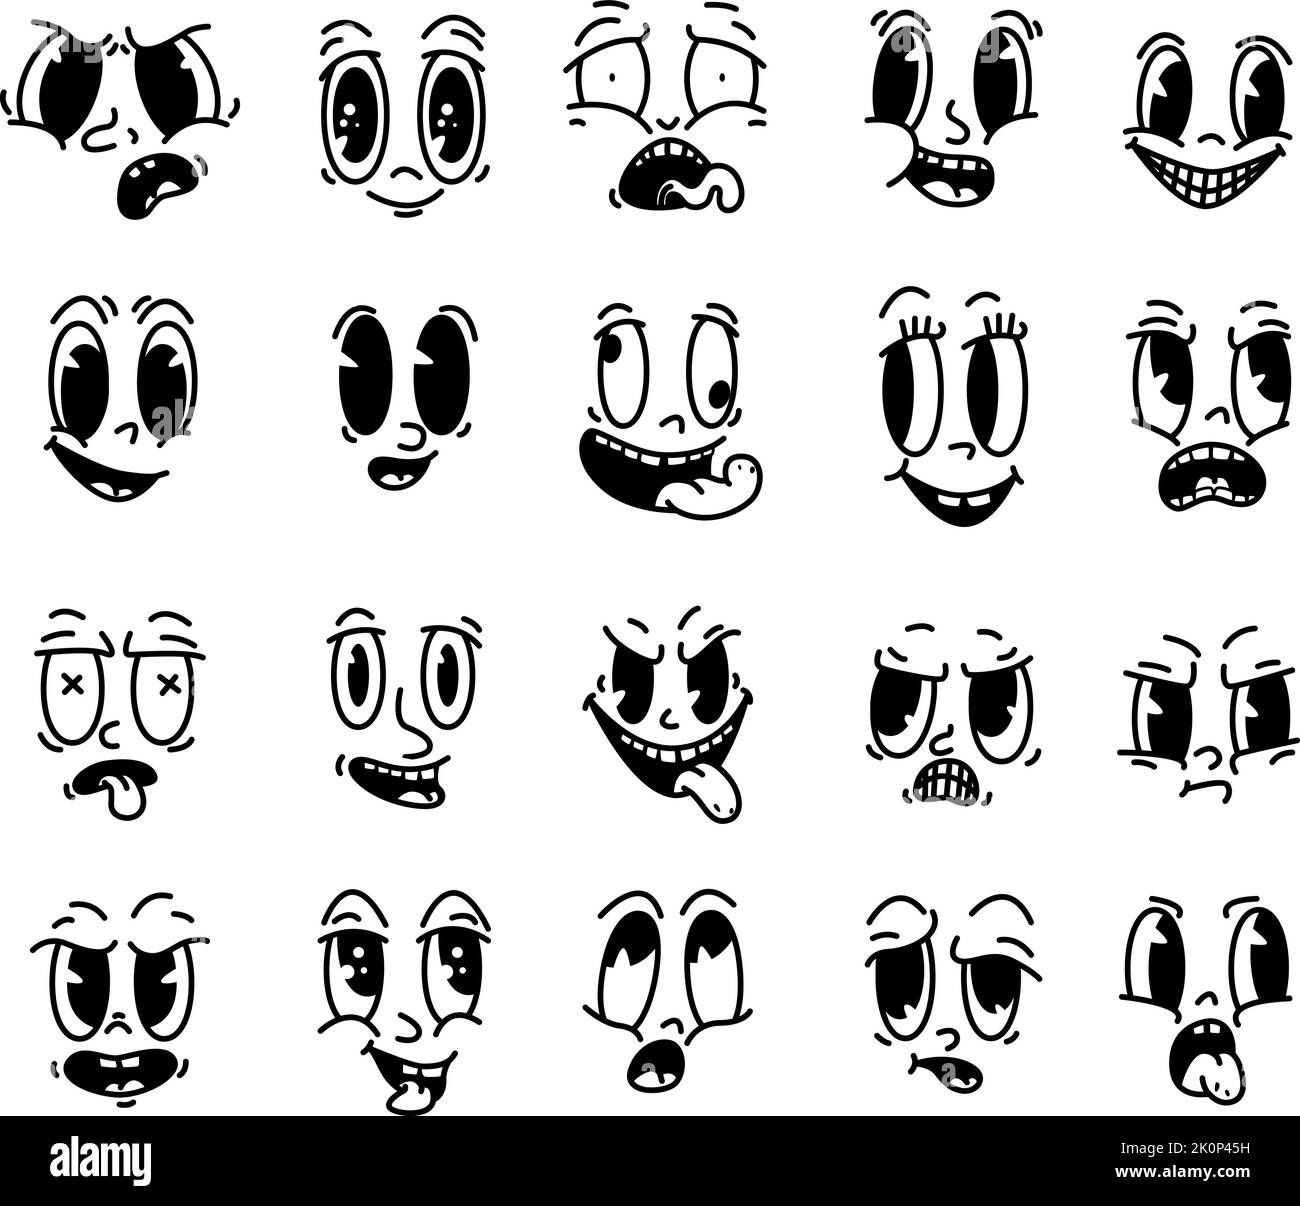 Retro comic vintage cartoon faces. Retro mascot face, isolated abstract expressions. Fun smile and surprise, angry heads snugly vector set. Different Stock Vector